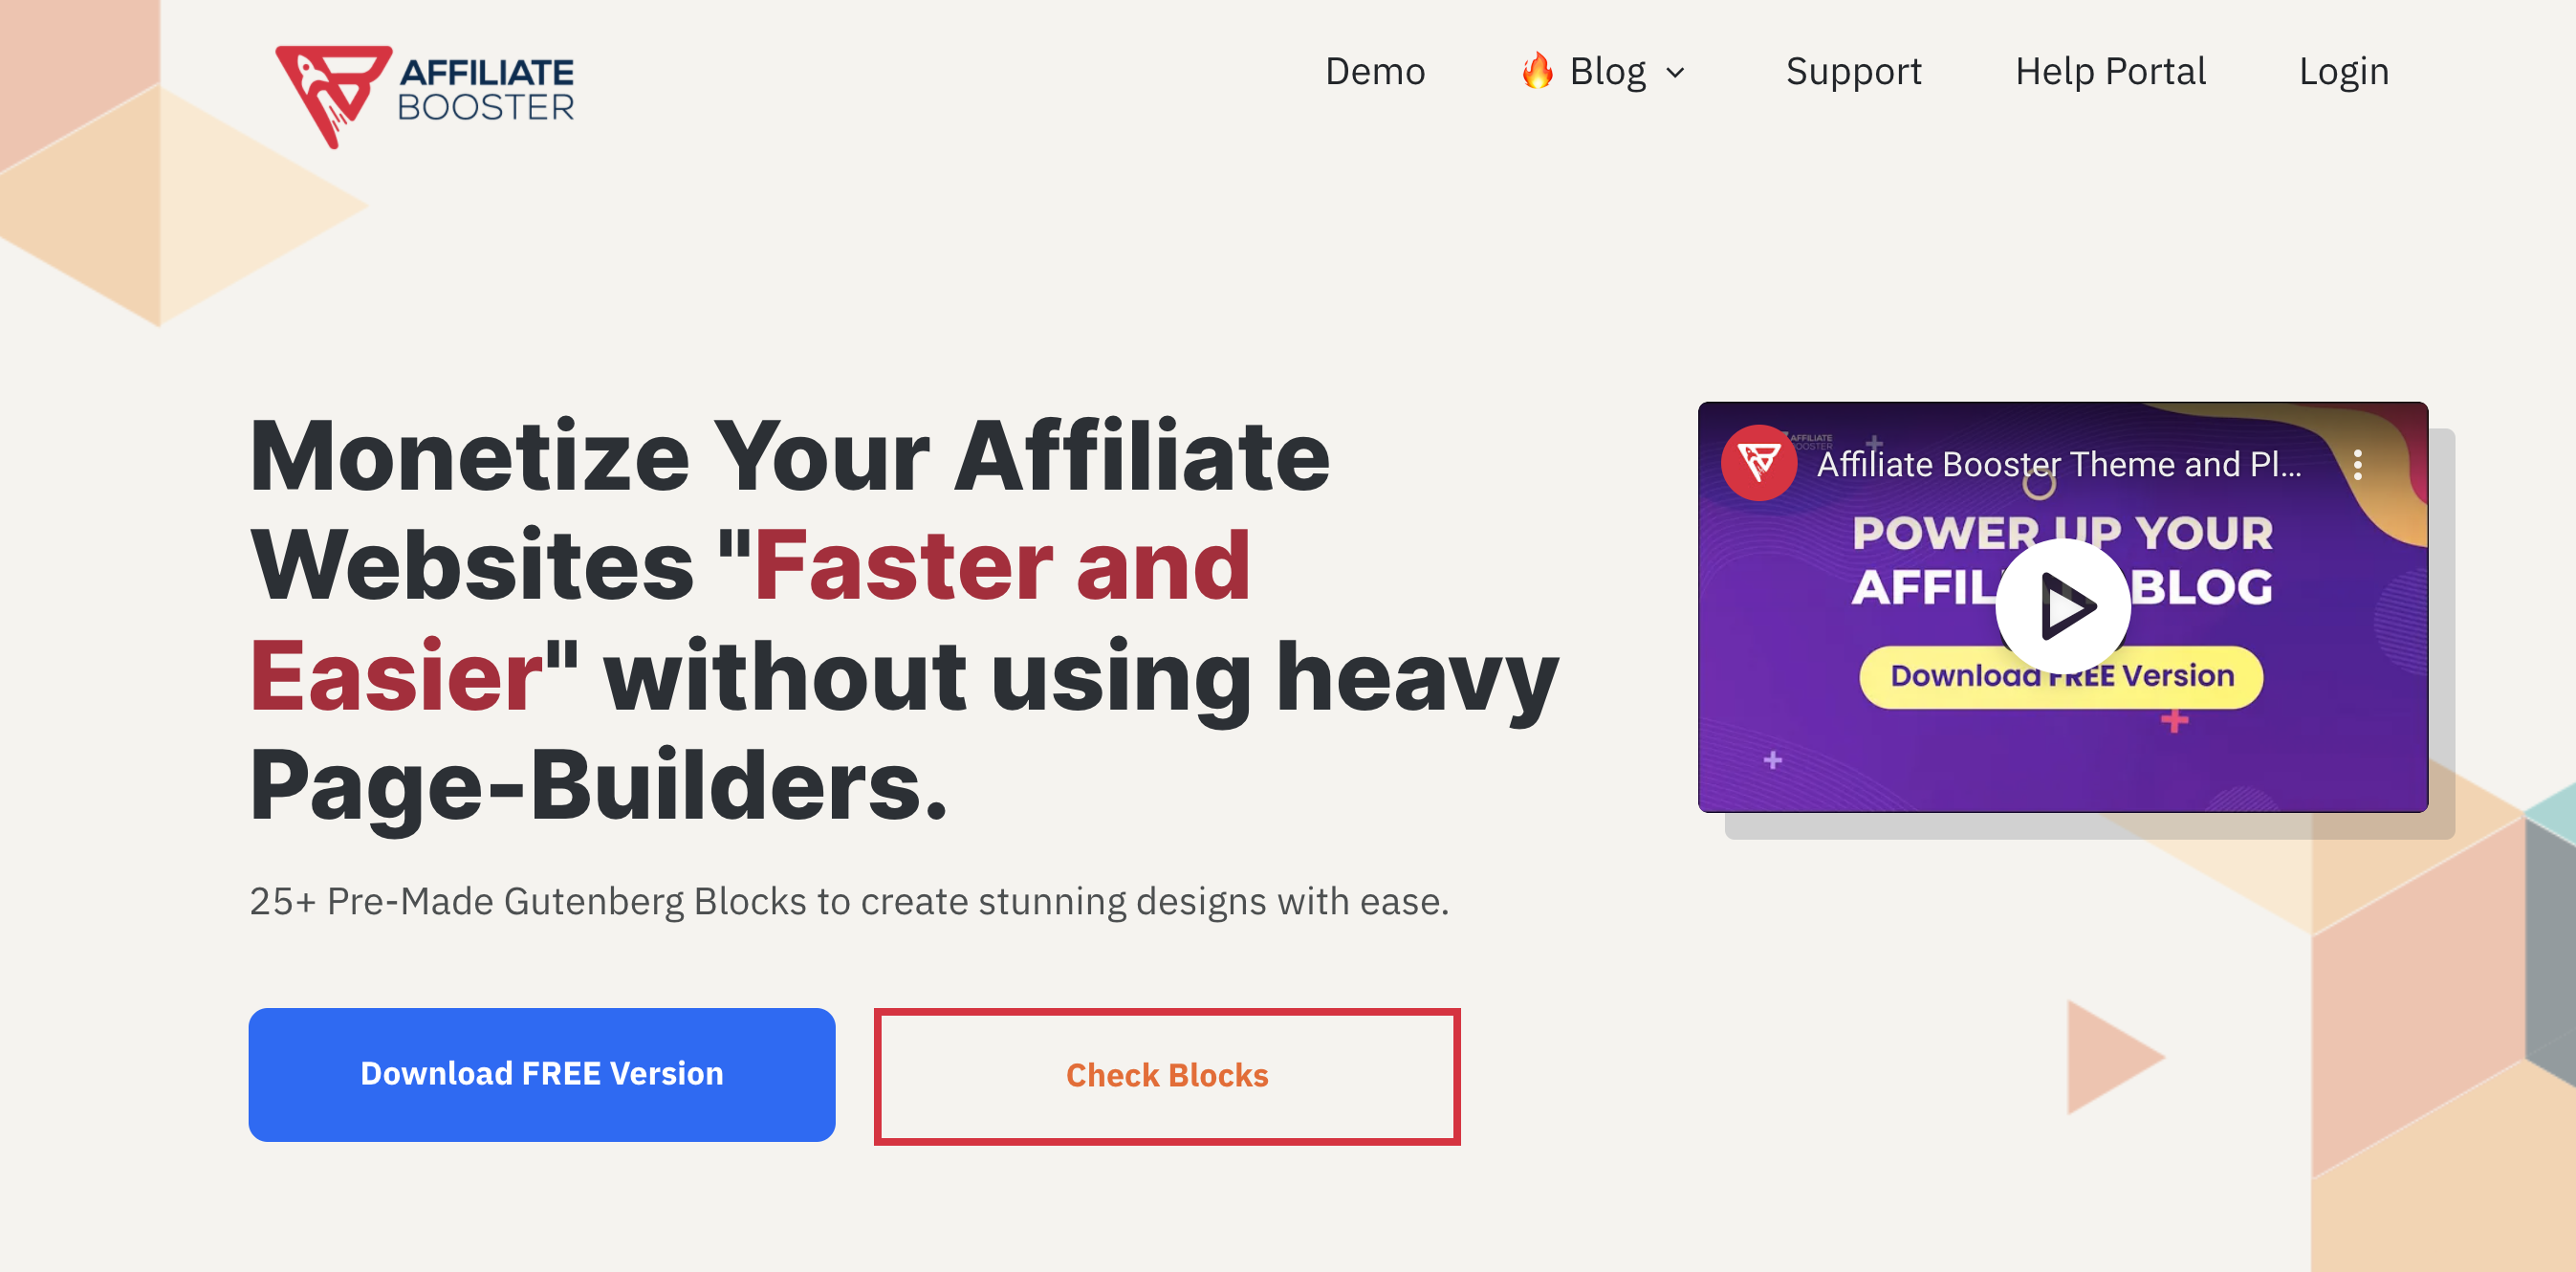 Affiliate Booster Banner